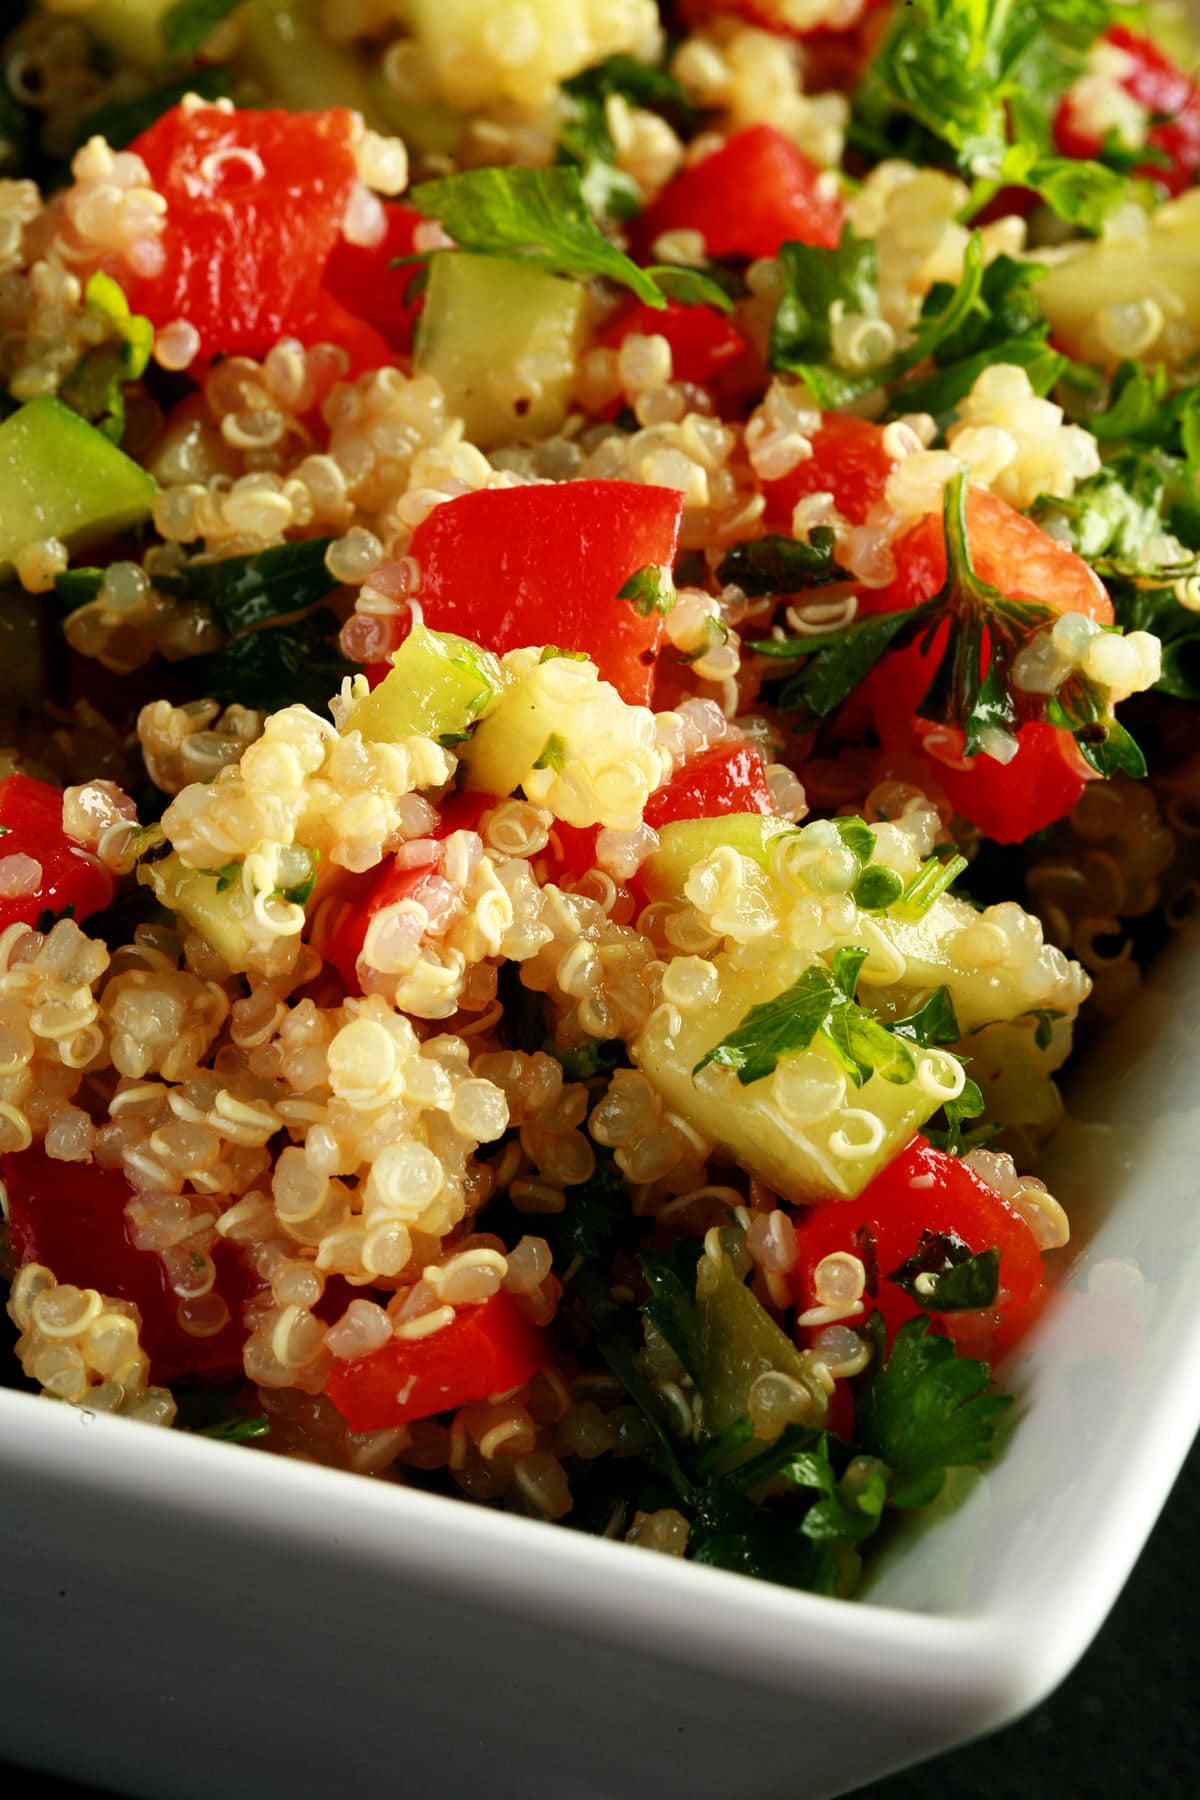 A square, white bowl holds a no-tomato quinoa based tabbouleh.  Beige quinoa, red pepper, cucumber, and parsley is visible throughout.